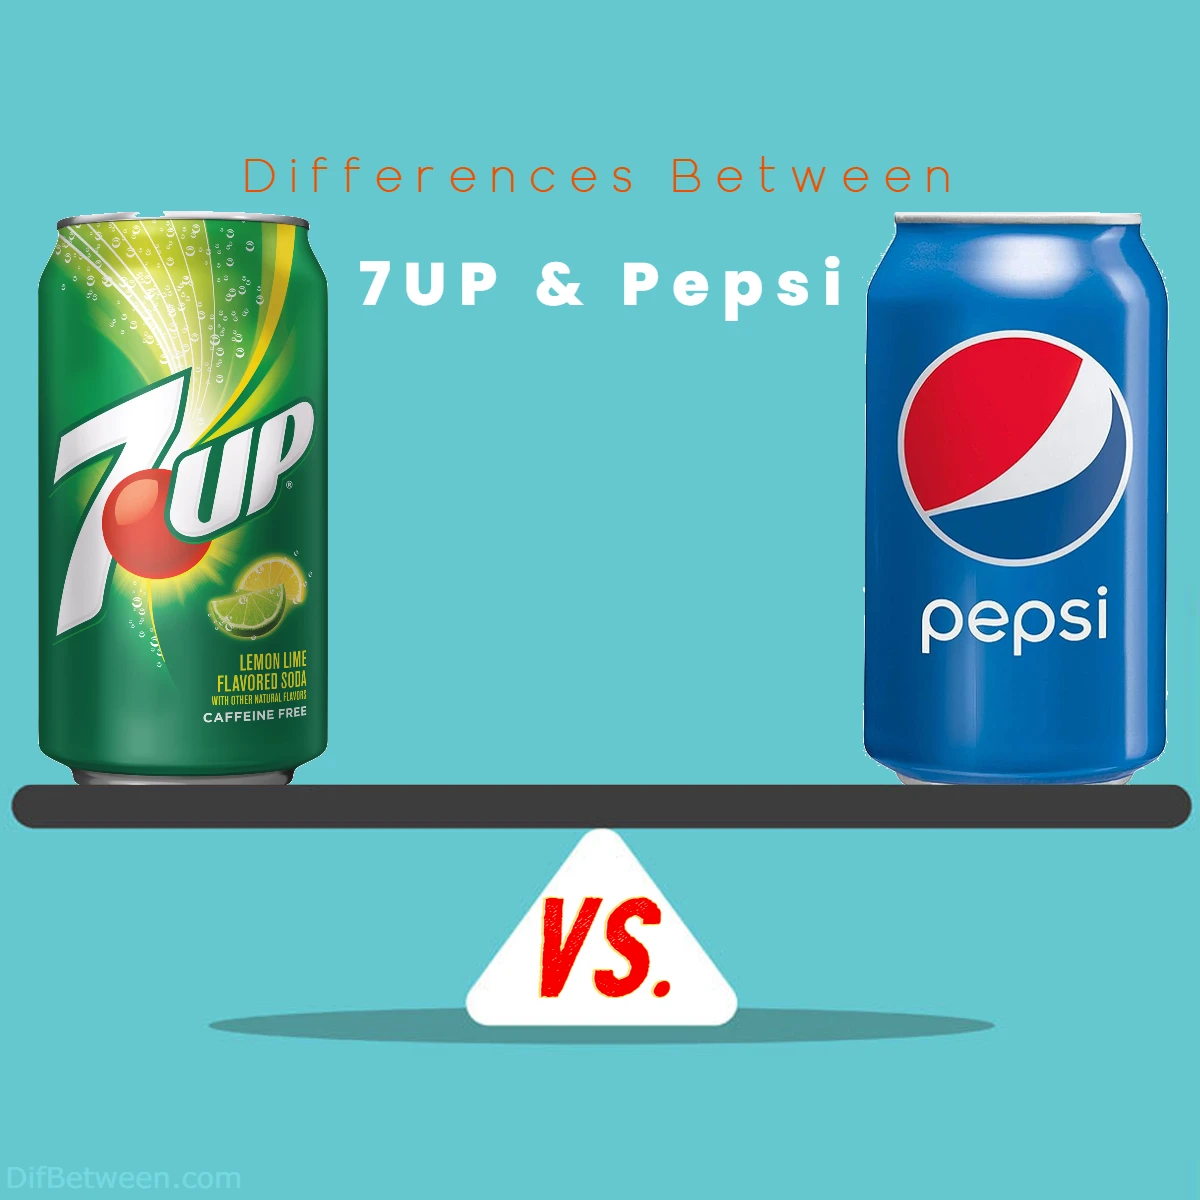 Differences Between Pepsi vs 7UP